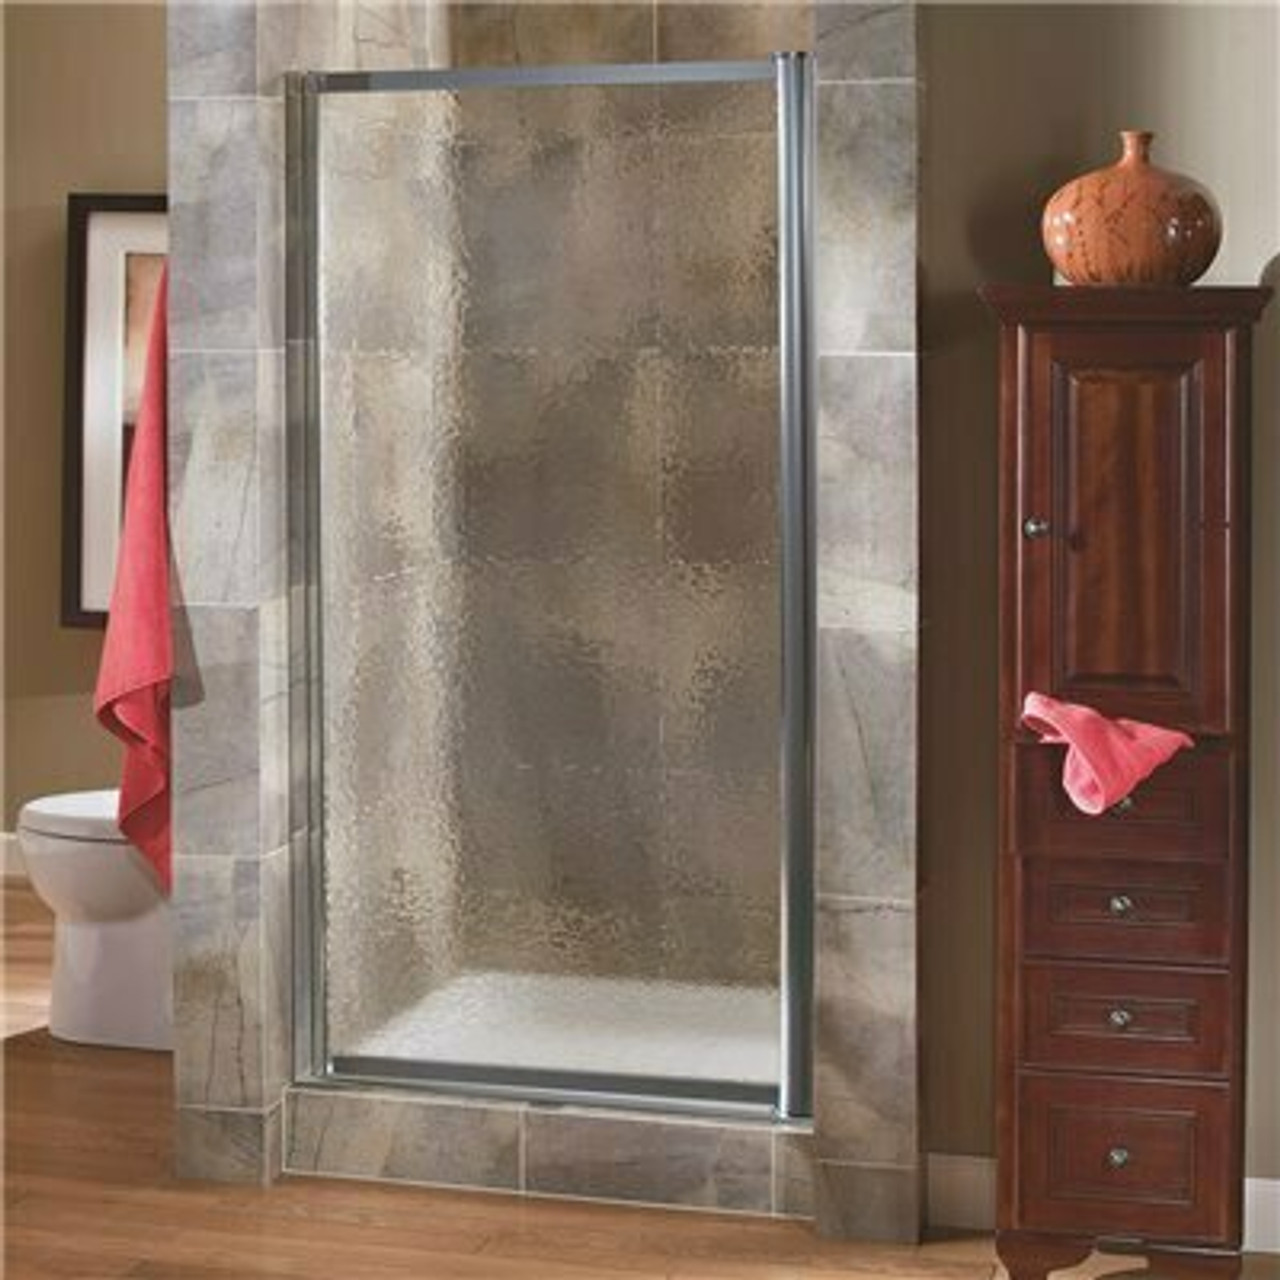 Foremost Tides 31 In. To 33 In. X 65 In. Framed Pivot Shower Door In Silver With Obscure Glass With Handle